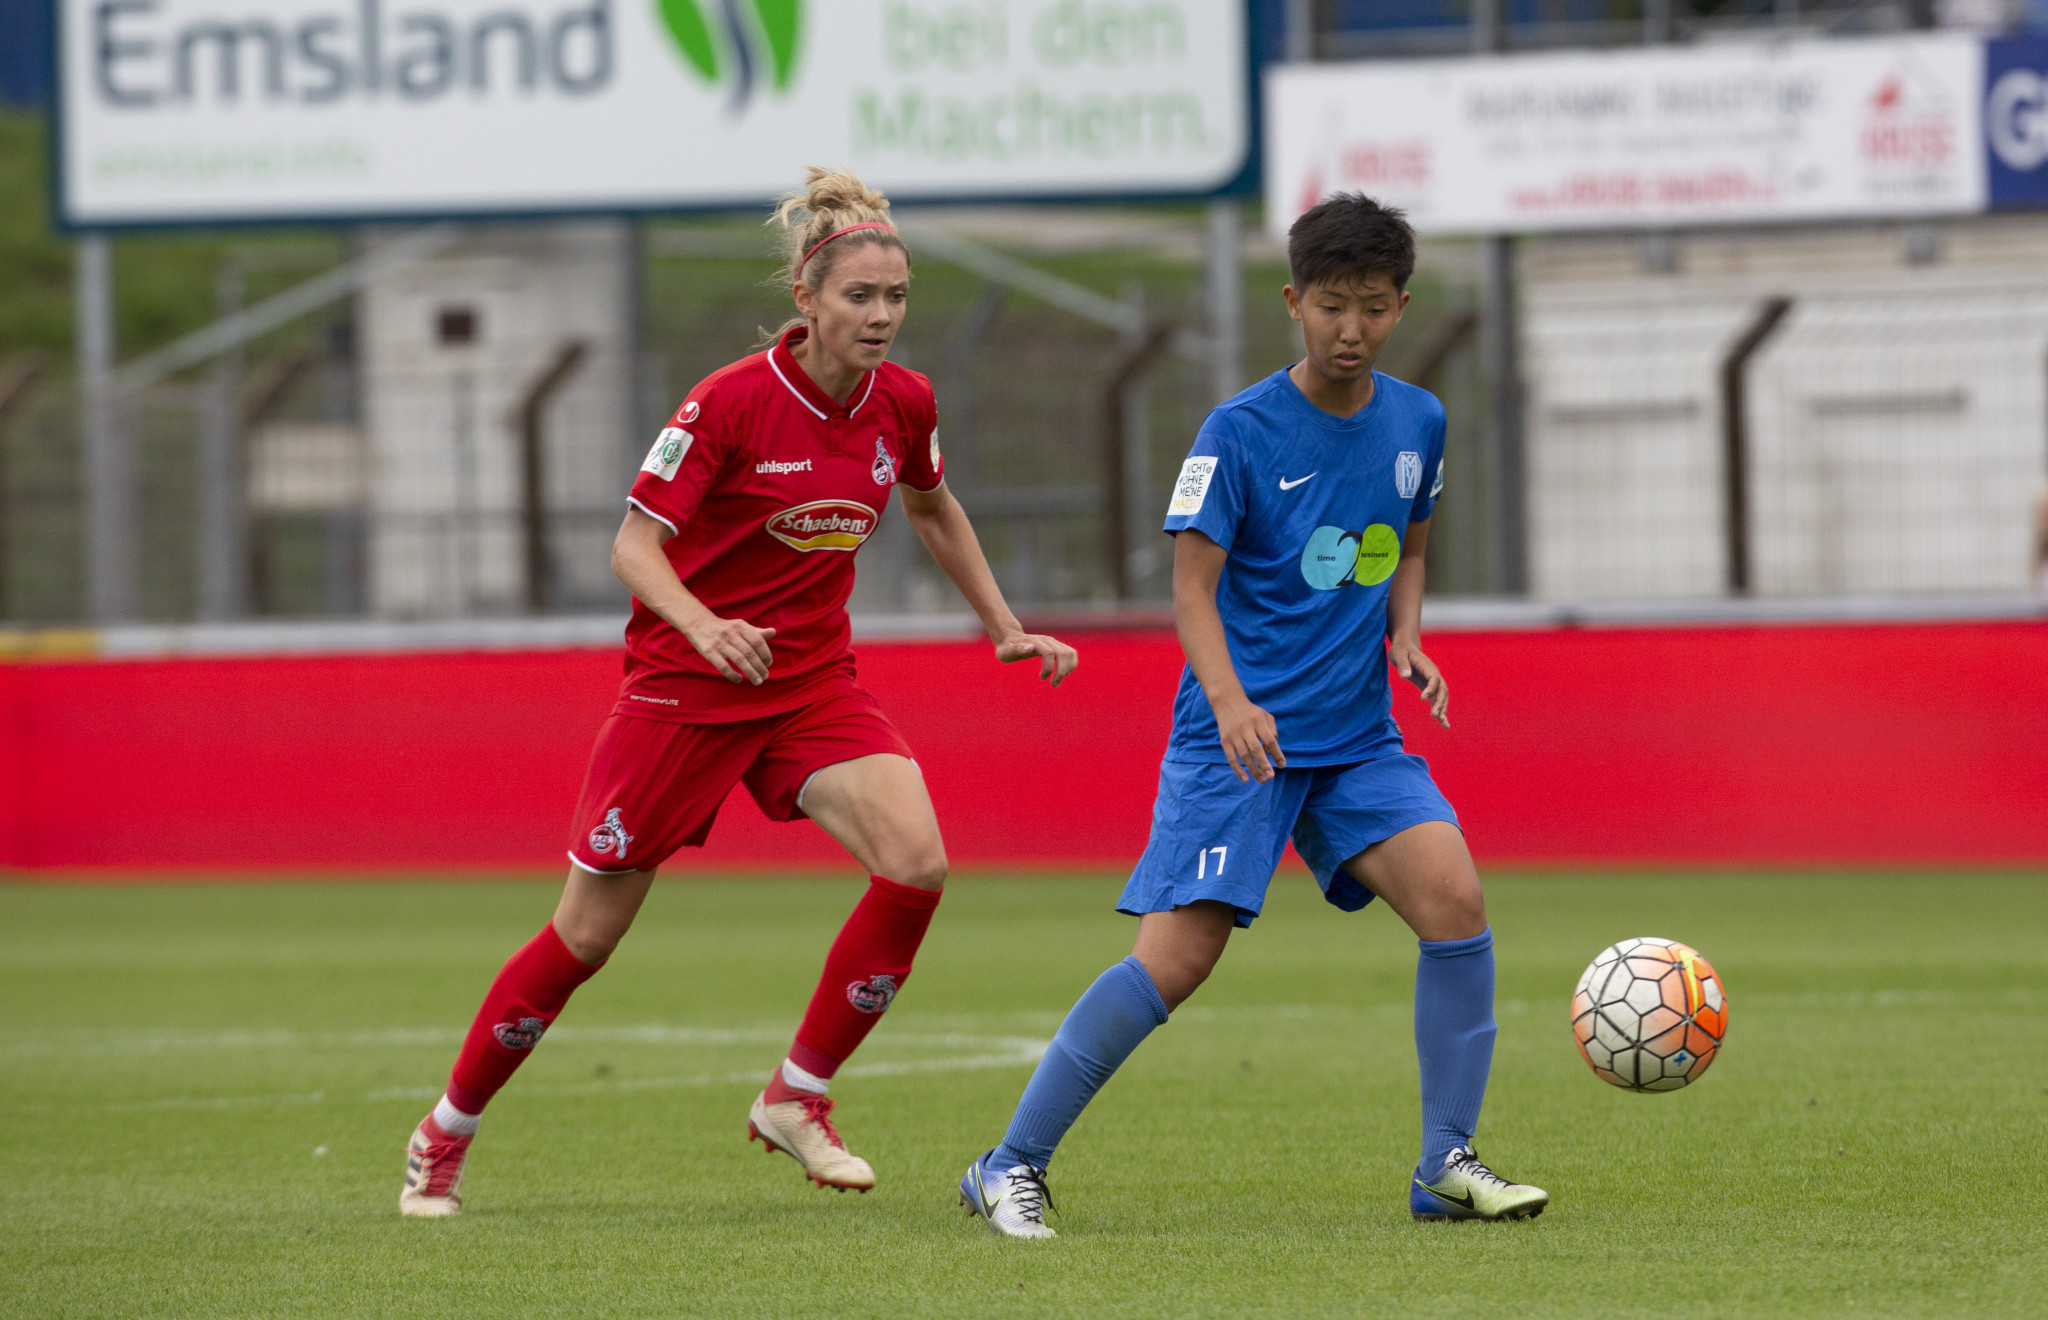 Shiho Shimoyamada plays for SV Meppen, a team in the second tier of the German Bundesliga ©Getty Images